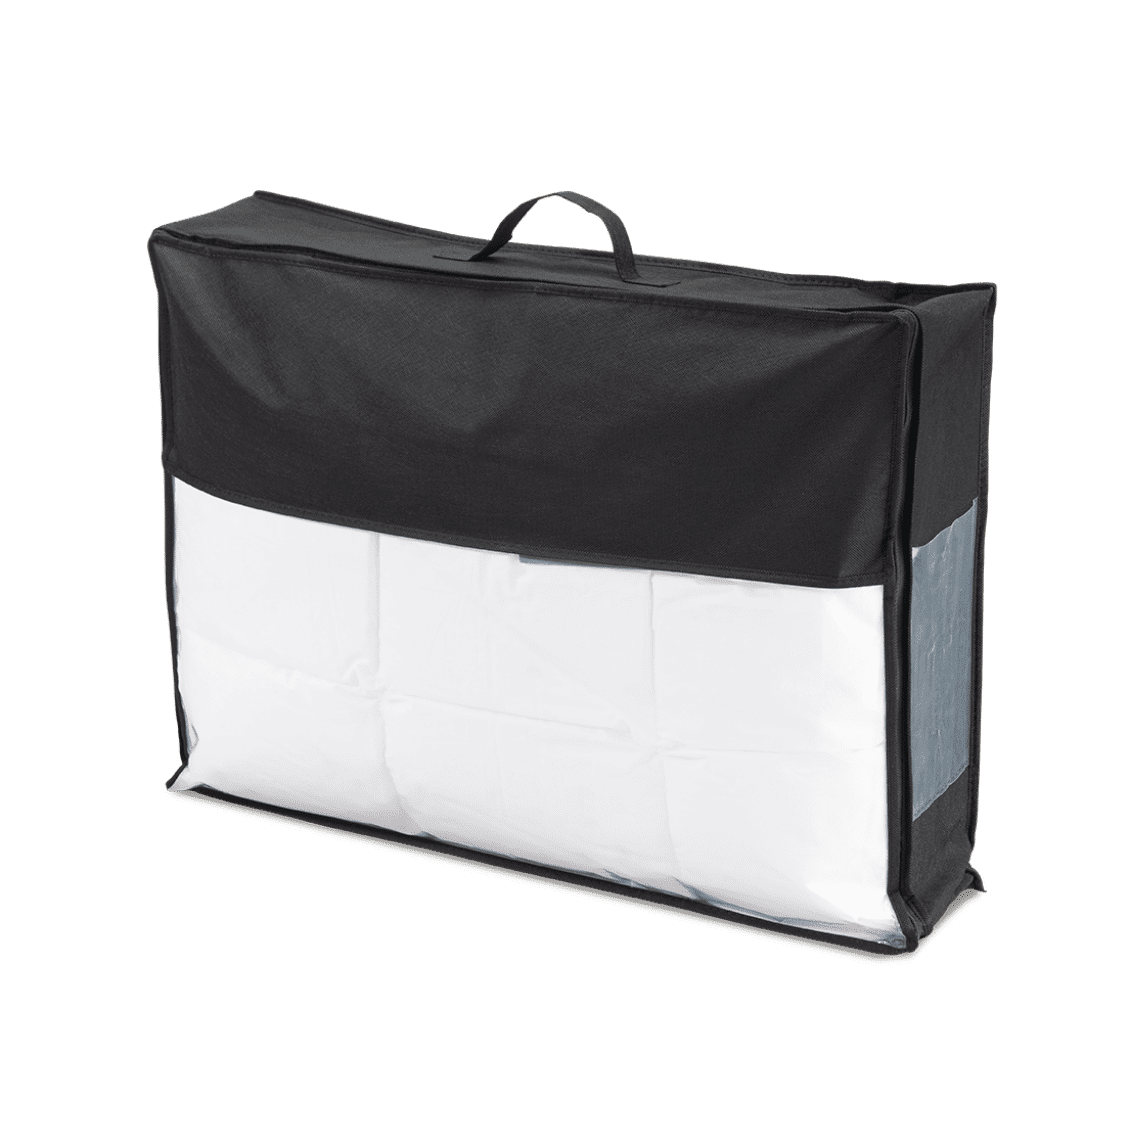 SLEEPWELL COLLECTION couette sac de transport